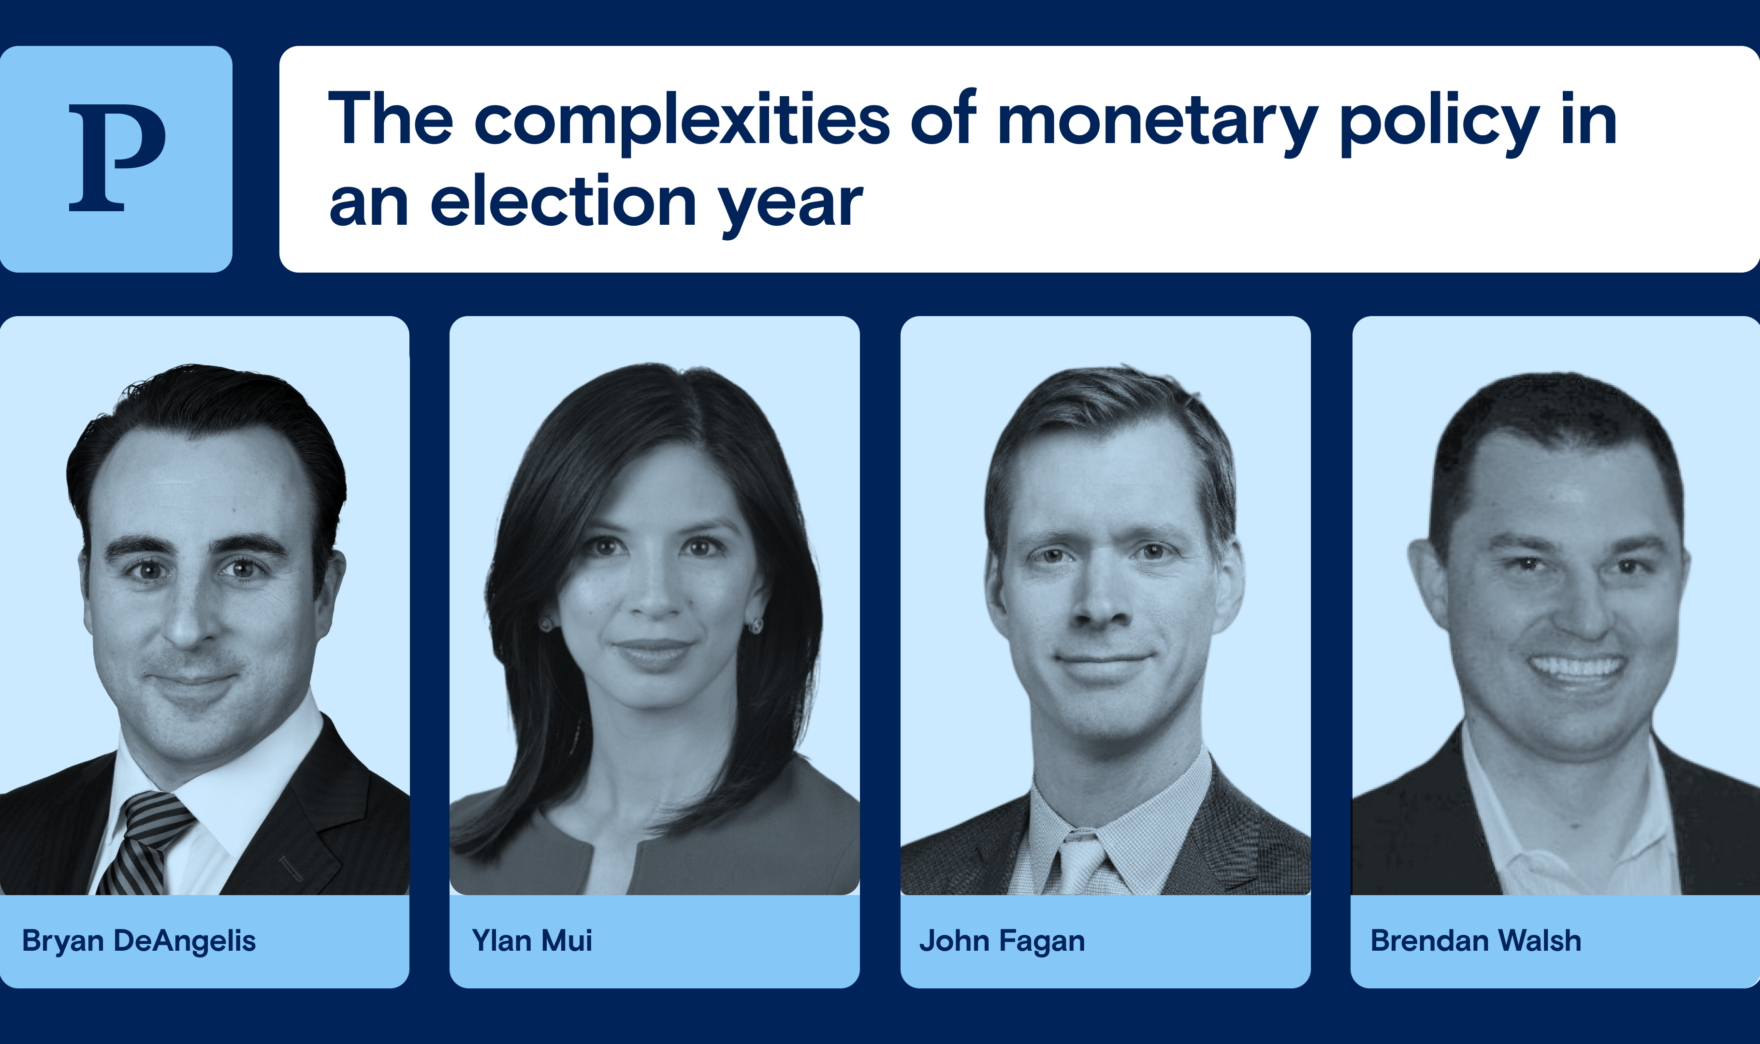 The complexities of monetary policy in an election year